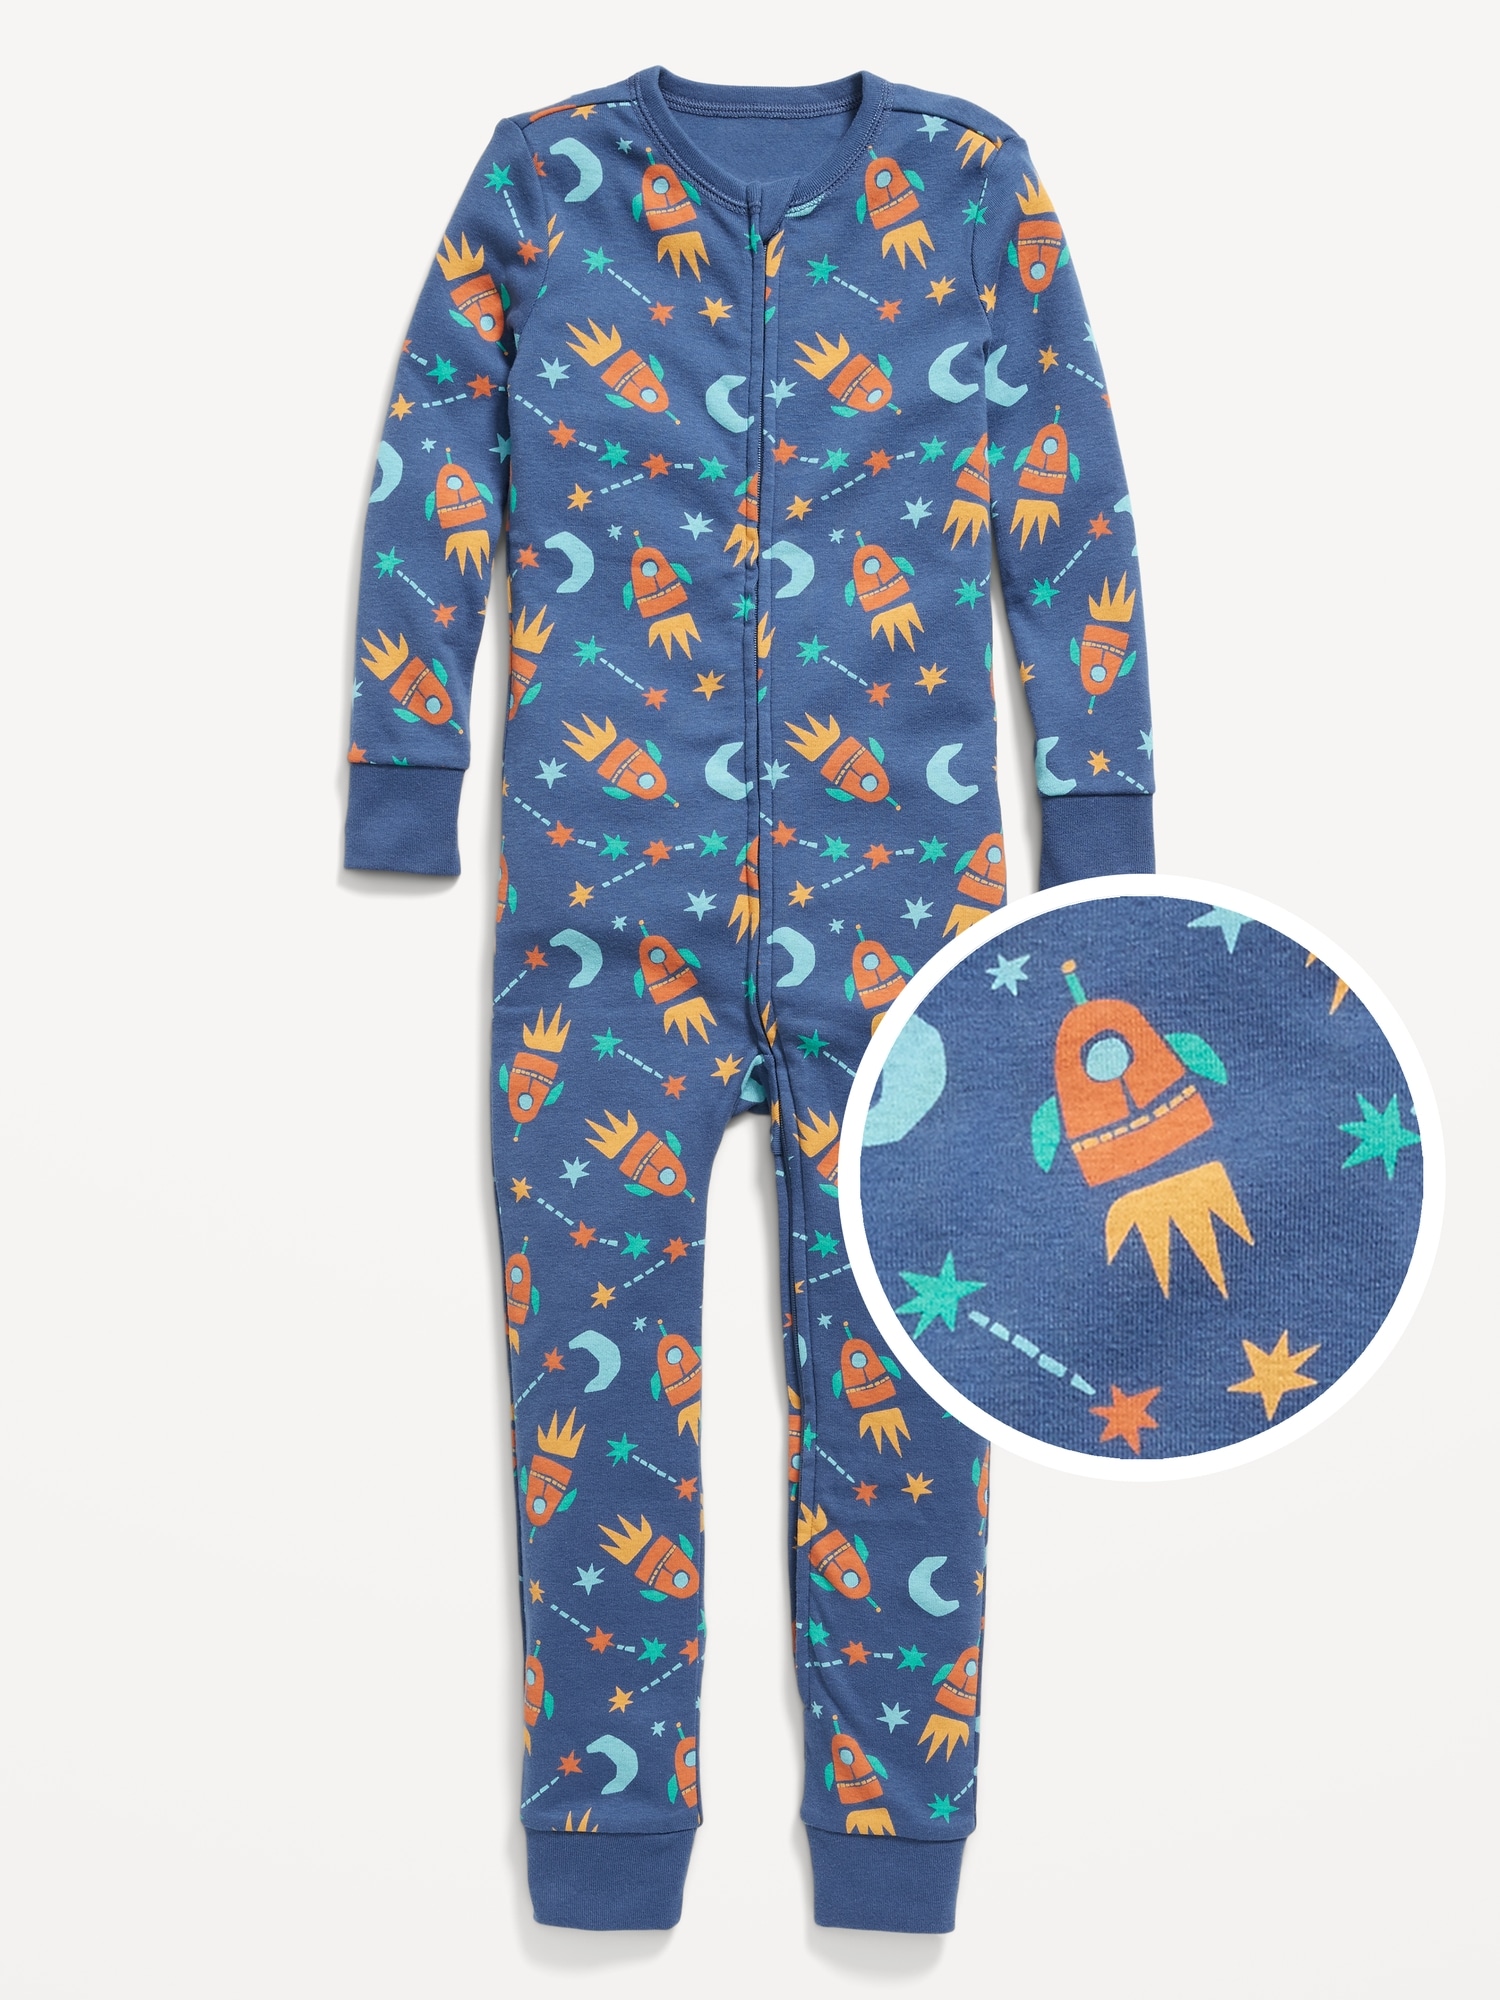 Unisex Snug-Fit 2-Way-Zip Printed Pajama One-Piece for Toddler & Baby Hot Deal